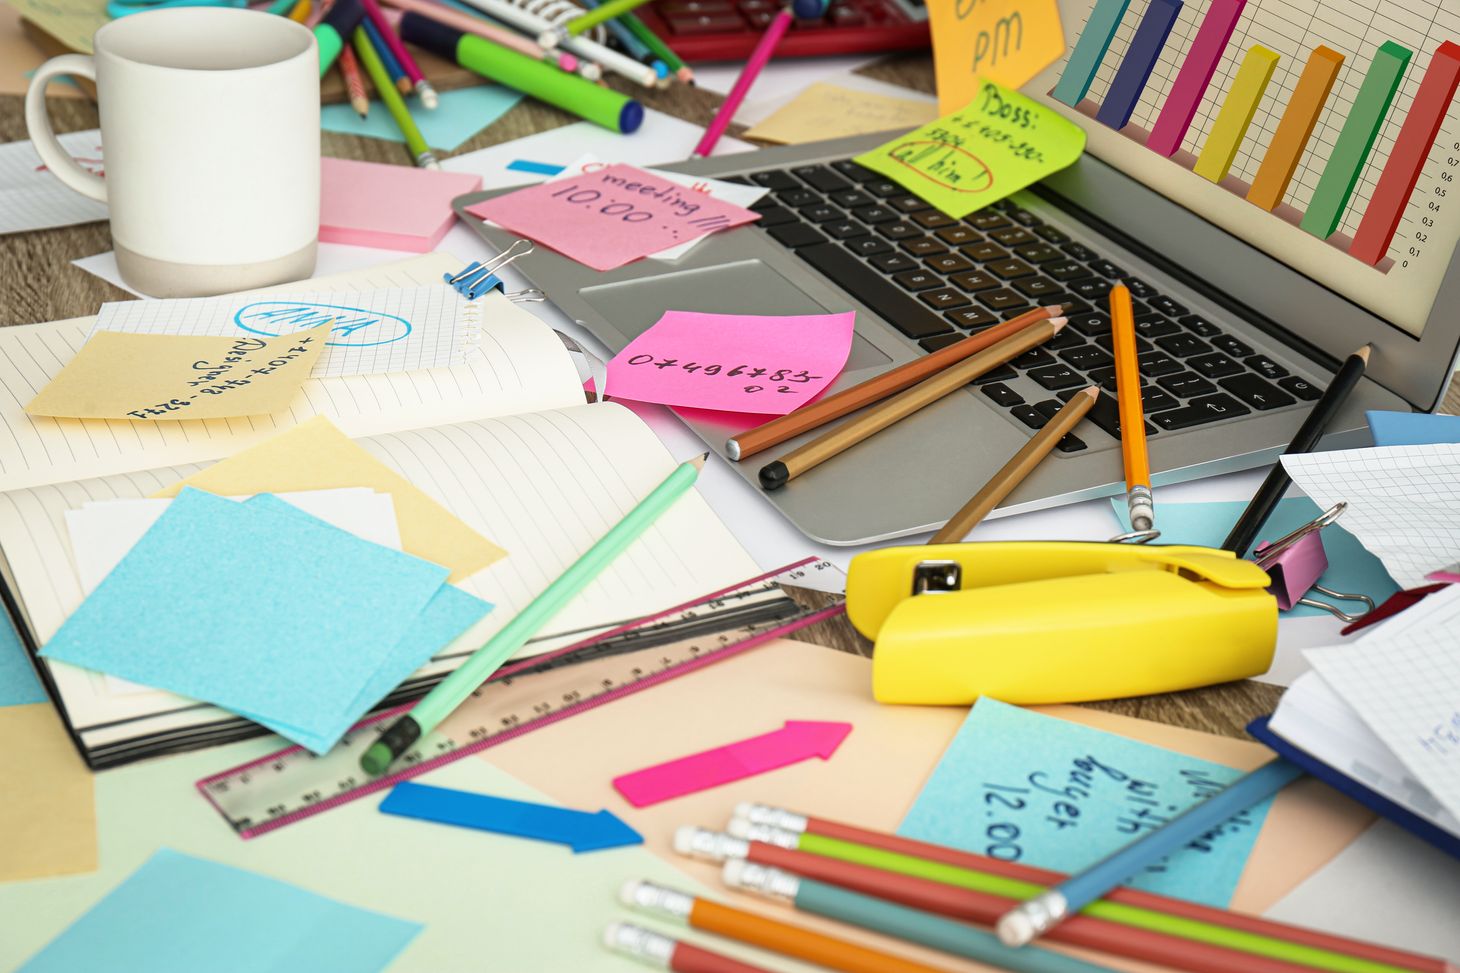 image of a messy desk signifying an unorganized person